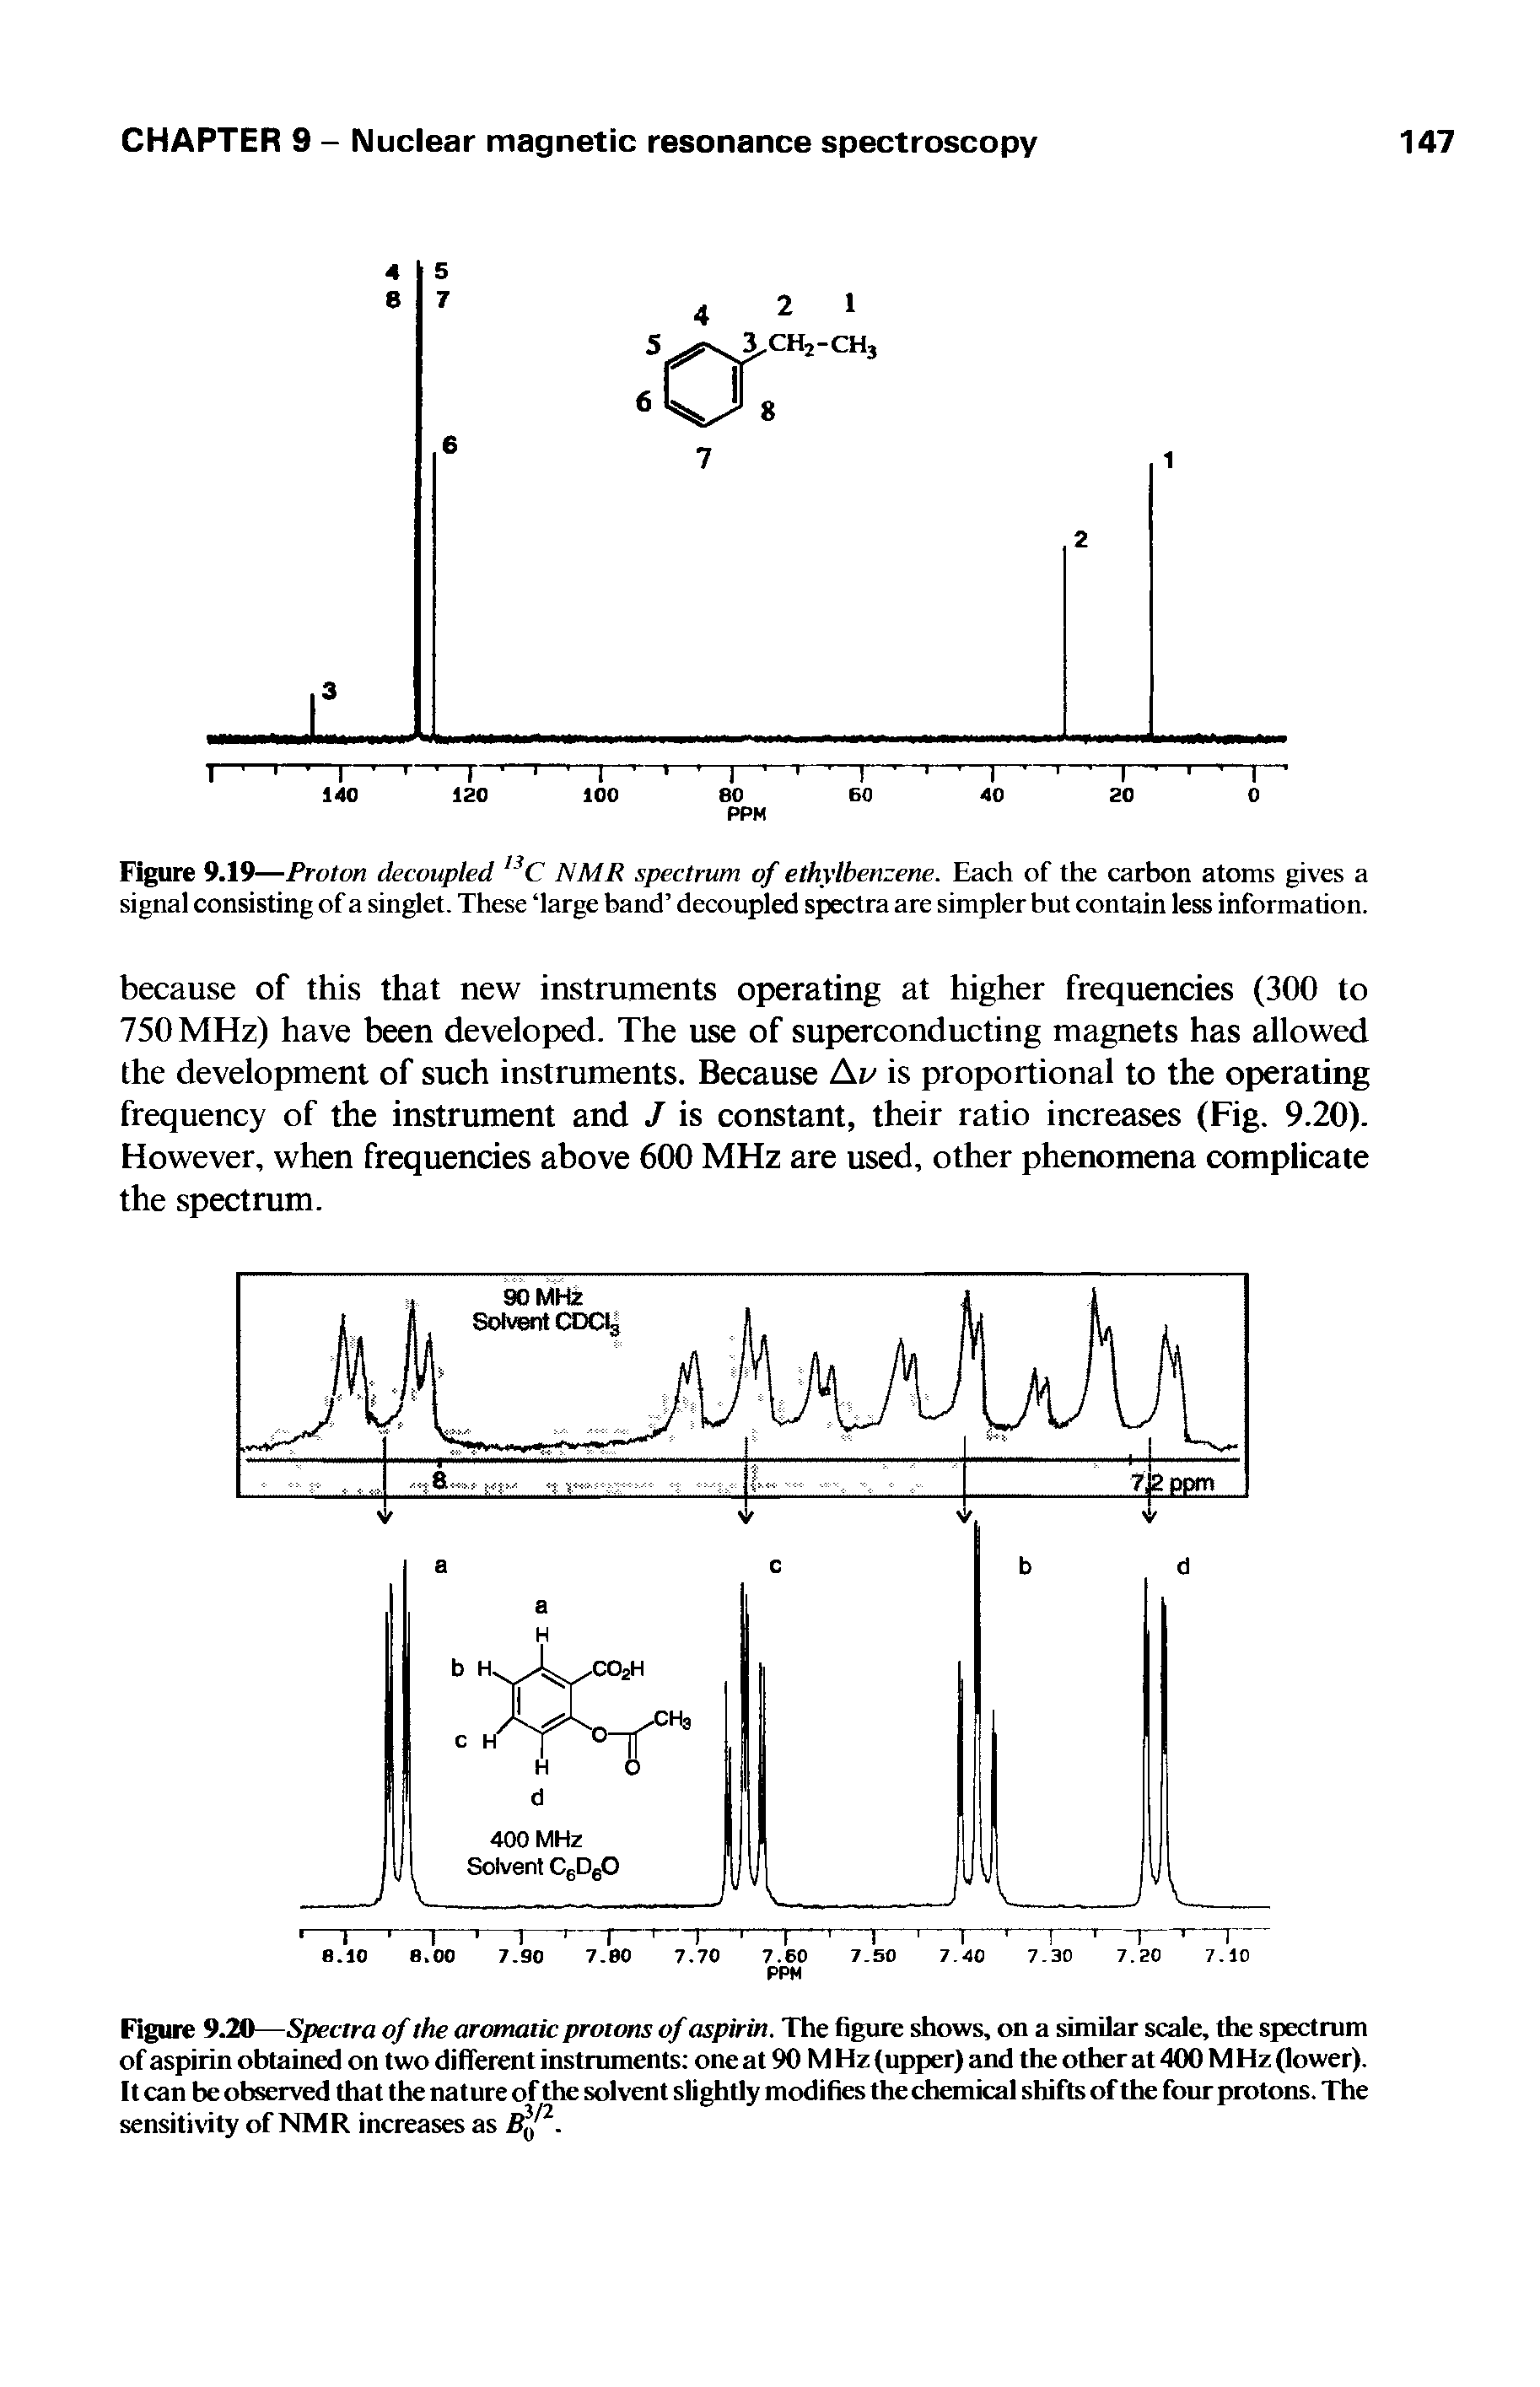 Figure 9.19—Proton decoupled 13C NMR spectrum of ethylbenzene. Each of the carbon atoms gives a signal consisting of a singlet. These large band decoupled spectra are simpler but contain less information.